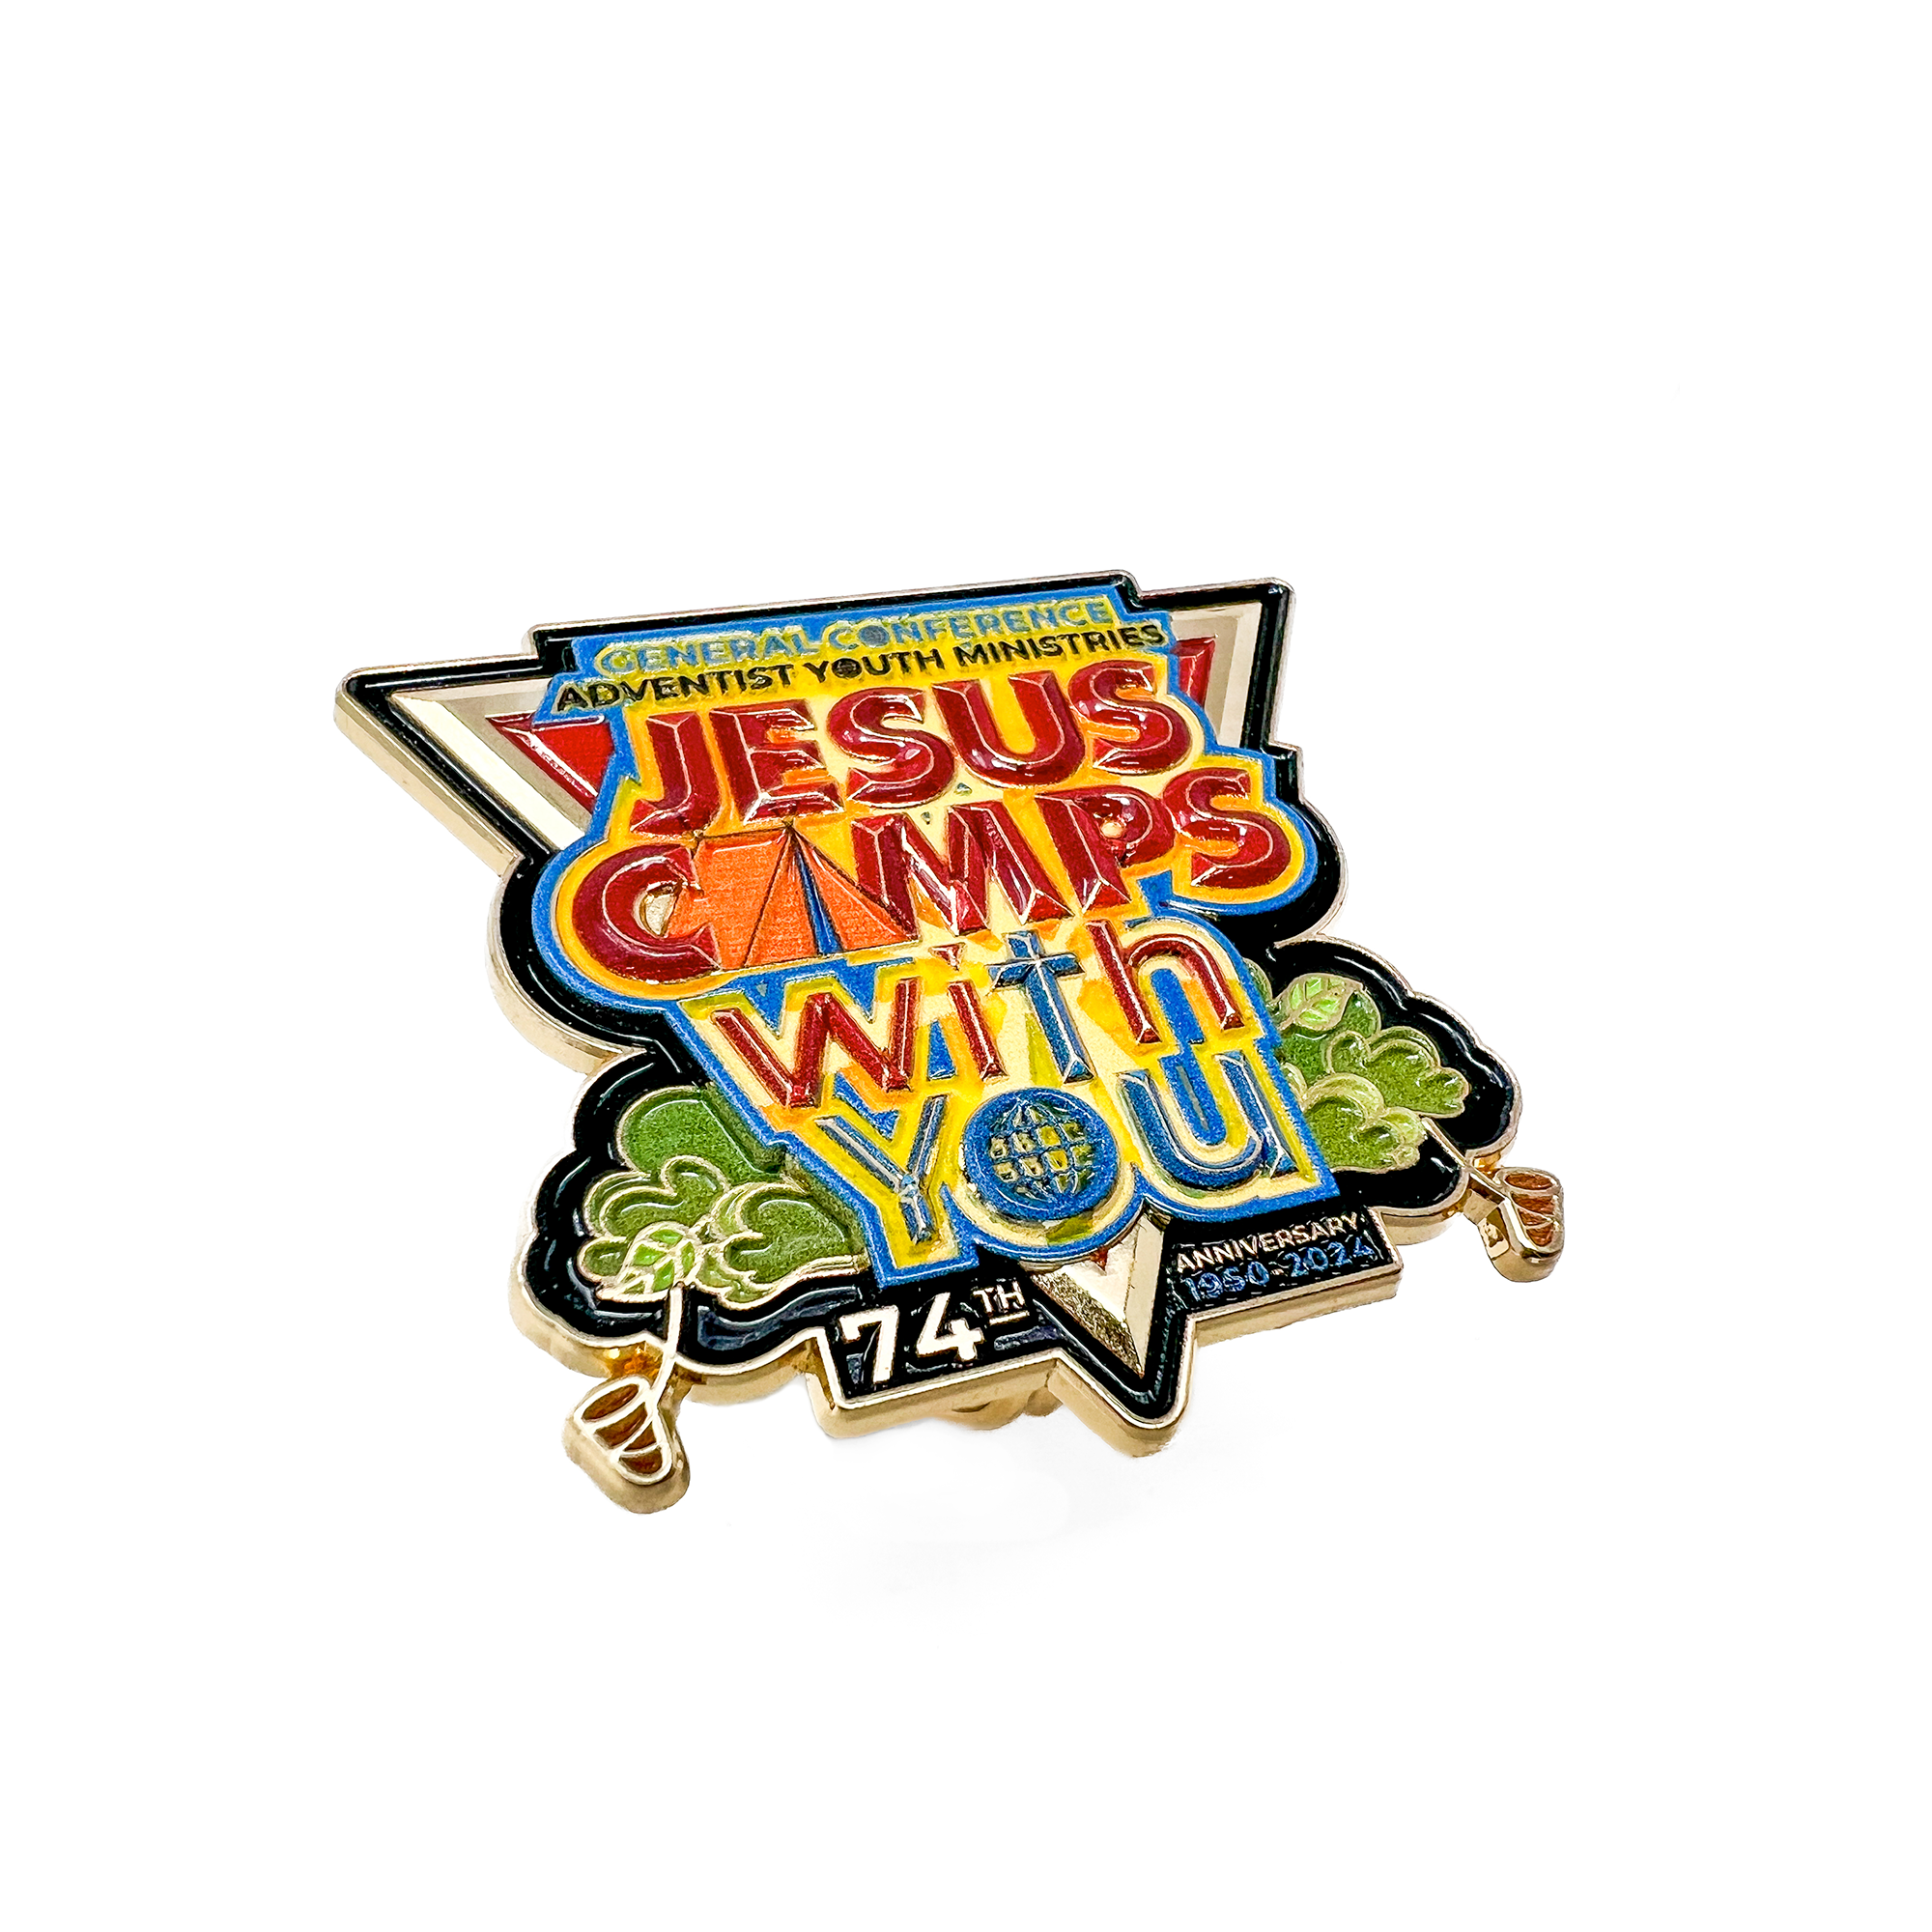 World Pathfinder Day 2024 "Jesus Camps With You" Pin